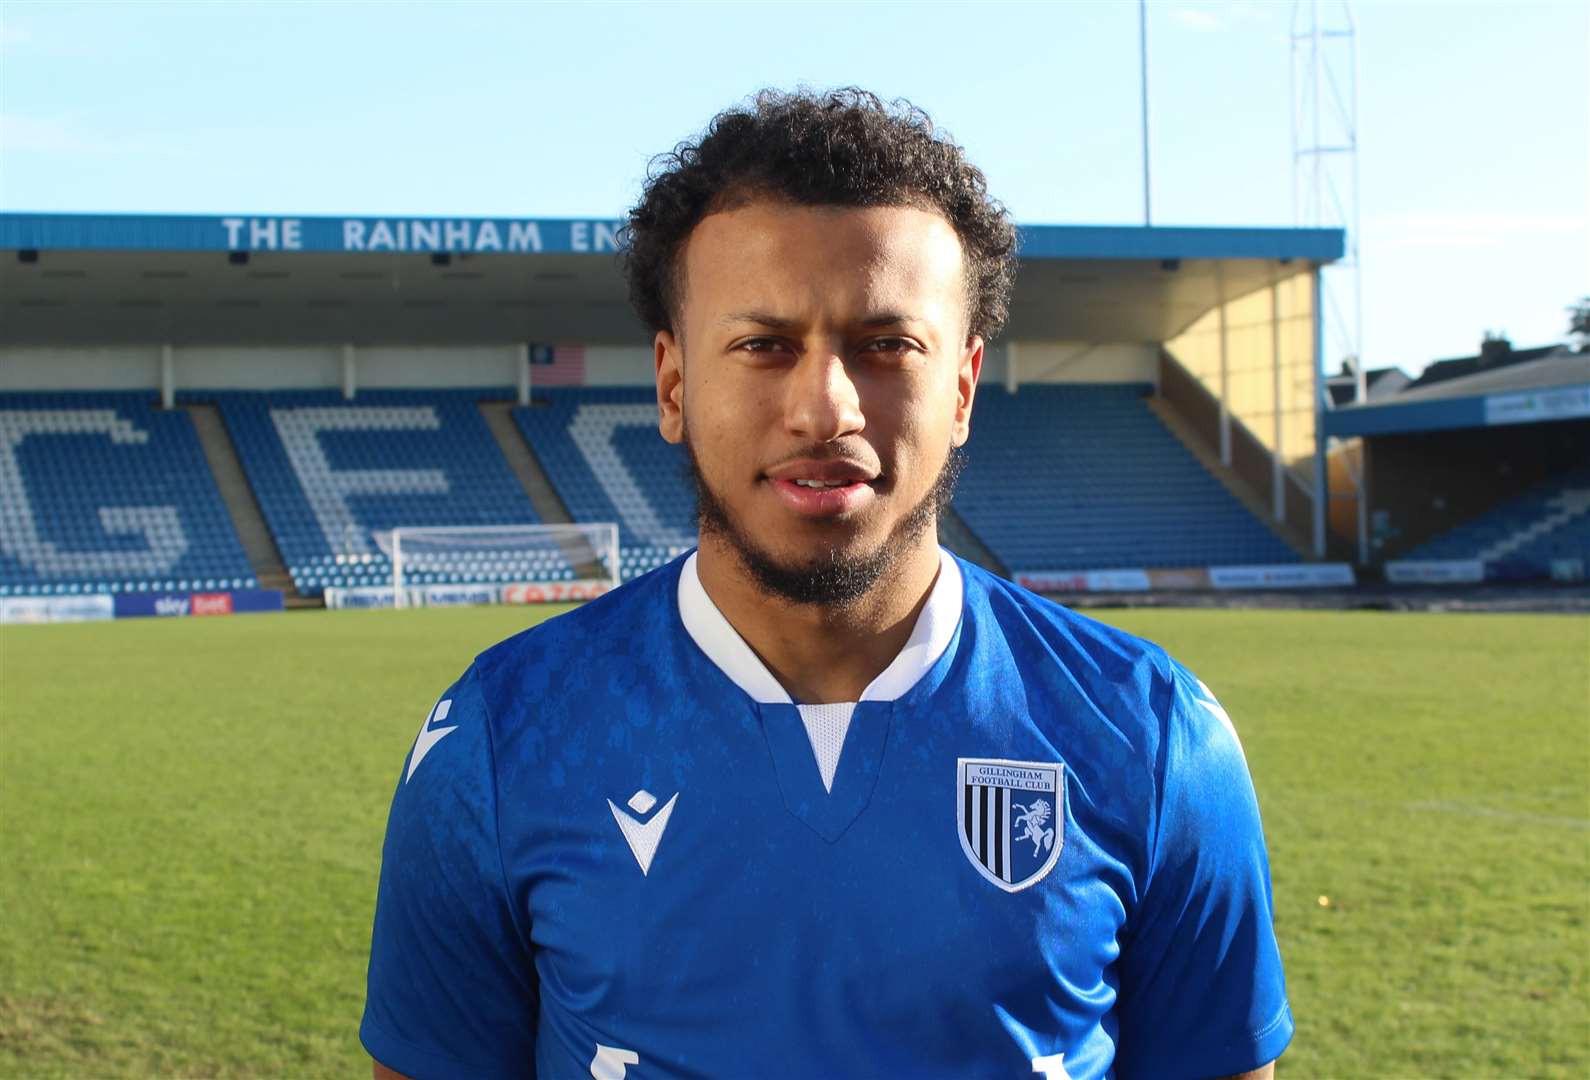 Jayden Clarke has yet to make his Gillingham debut following his January move from Dulwich Hamlet